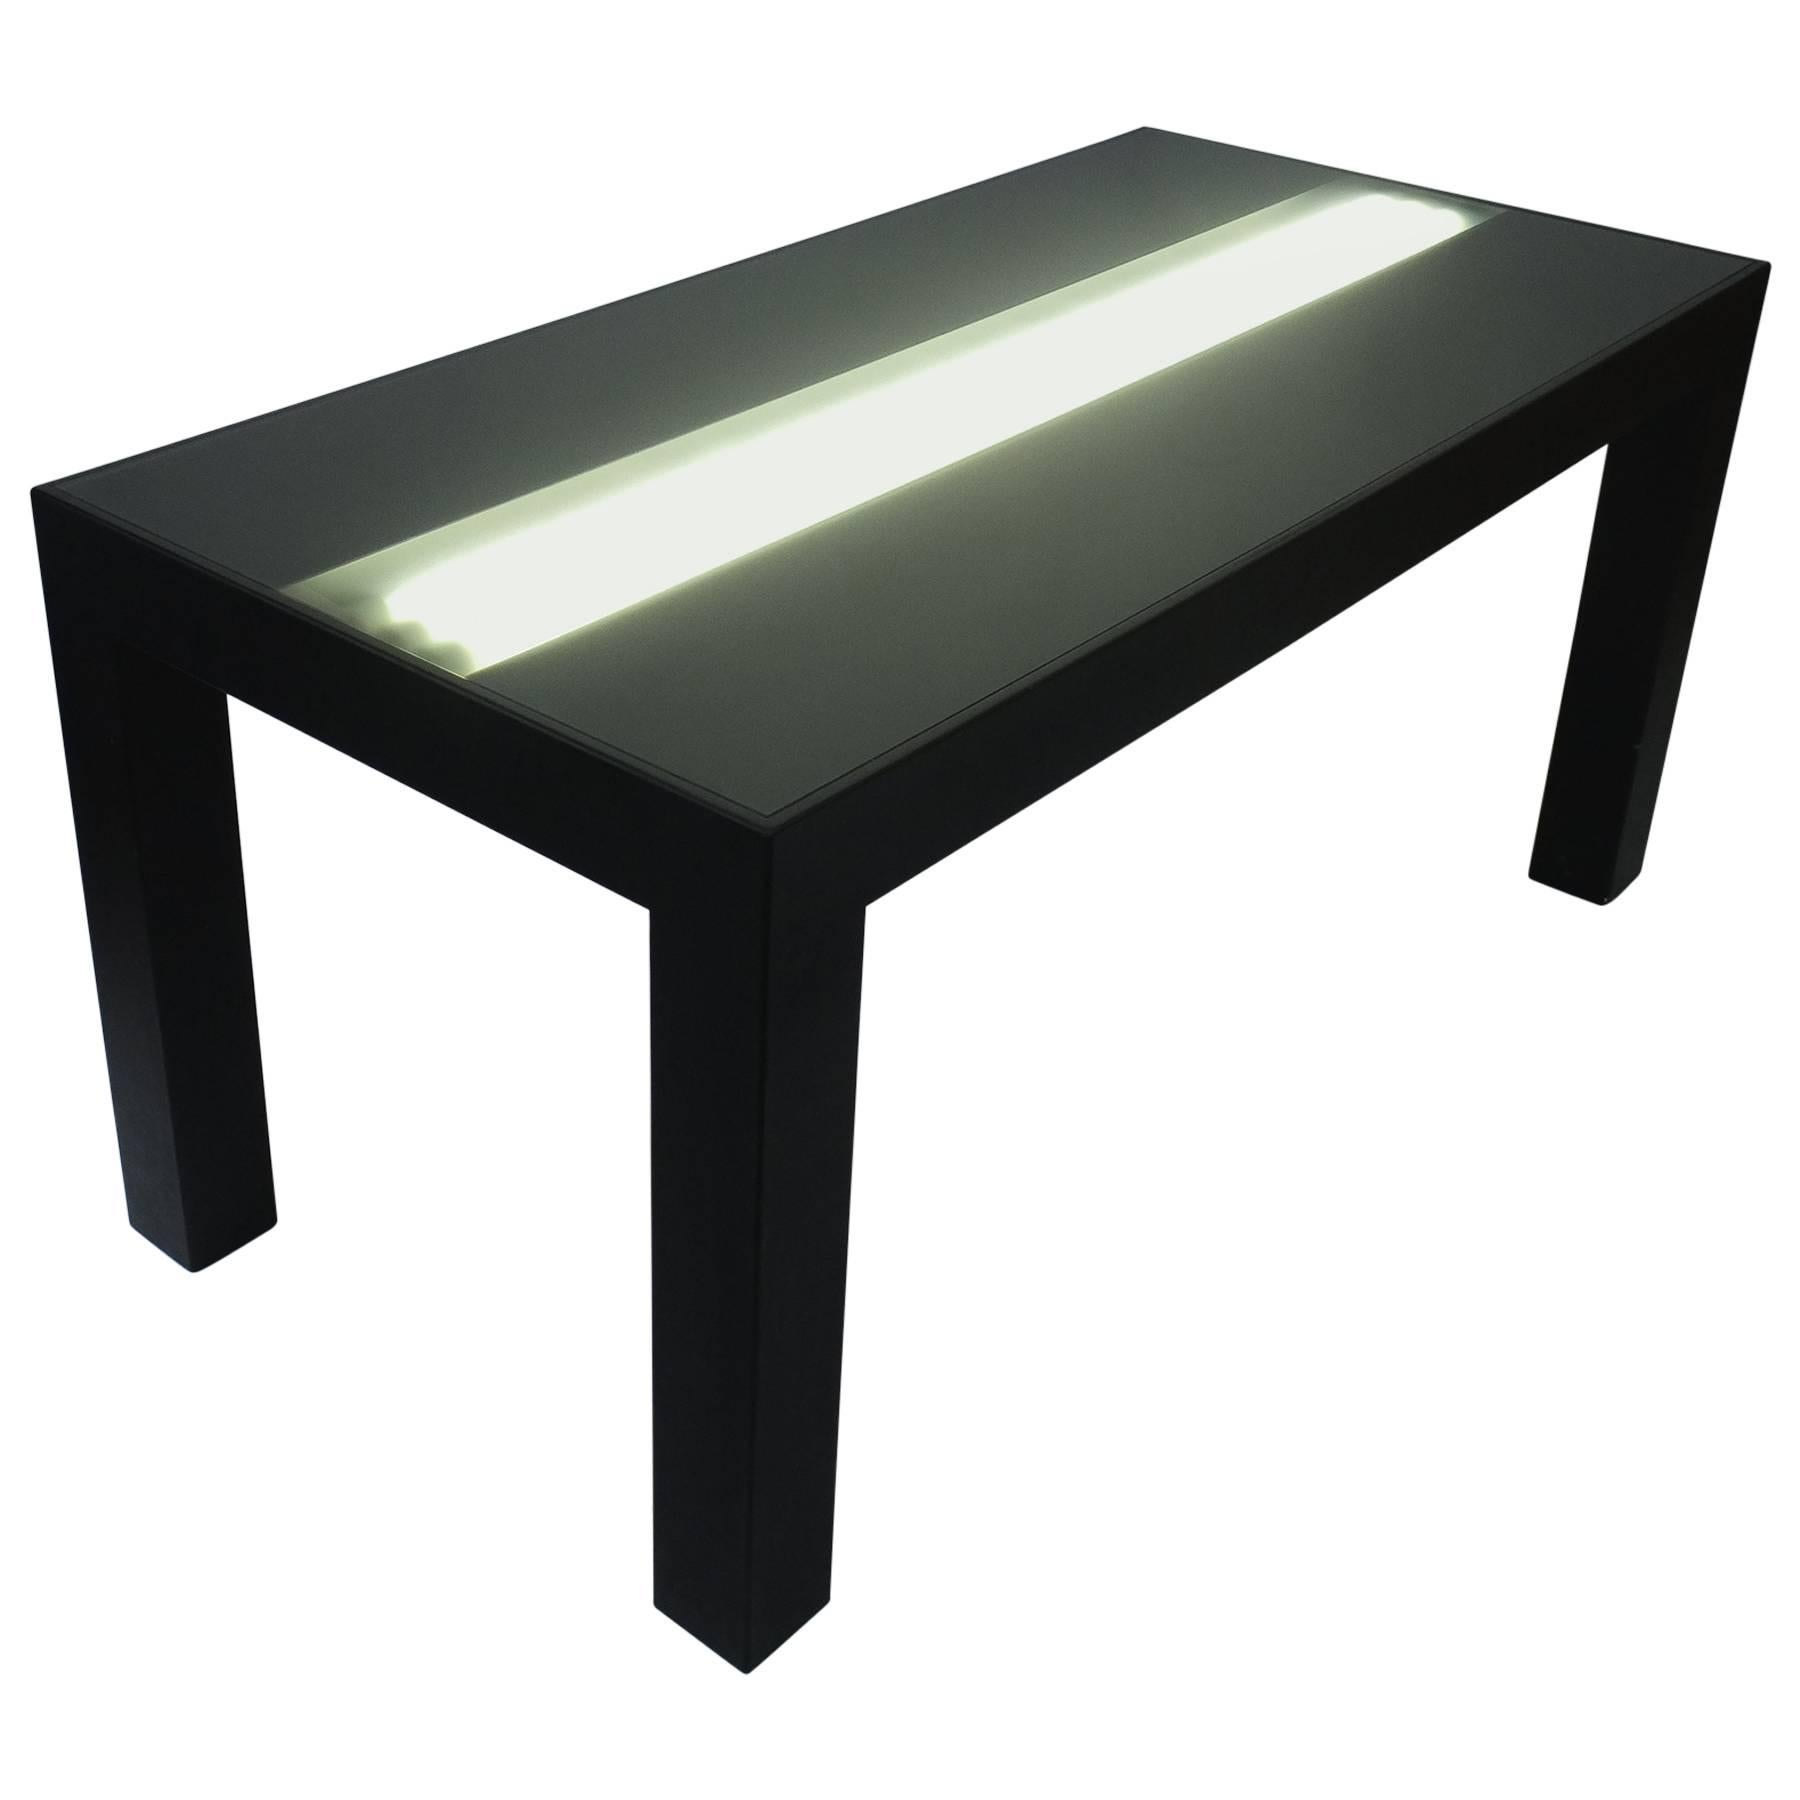 Johanna Grawunder Illuminated Dining Table by  for Post-Design, 2001